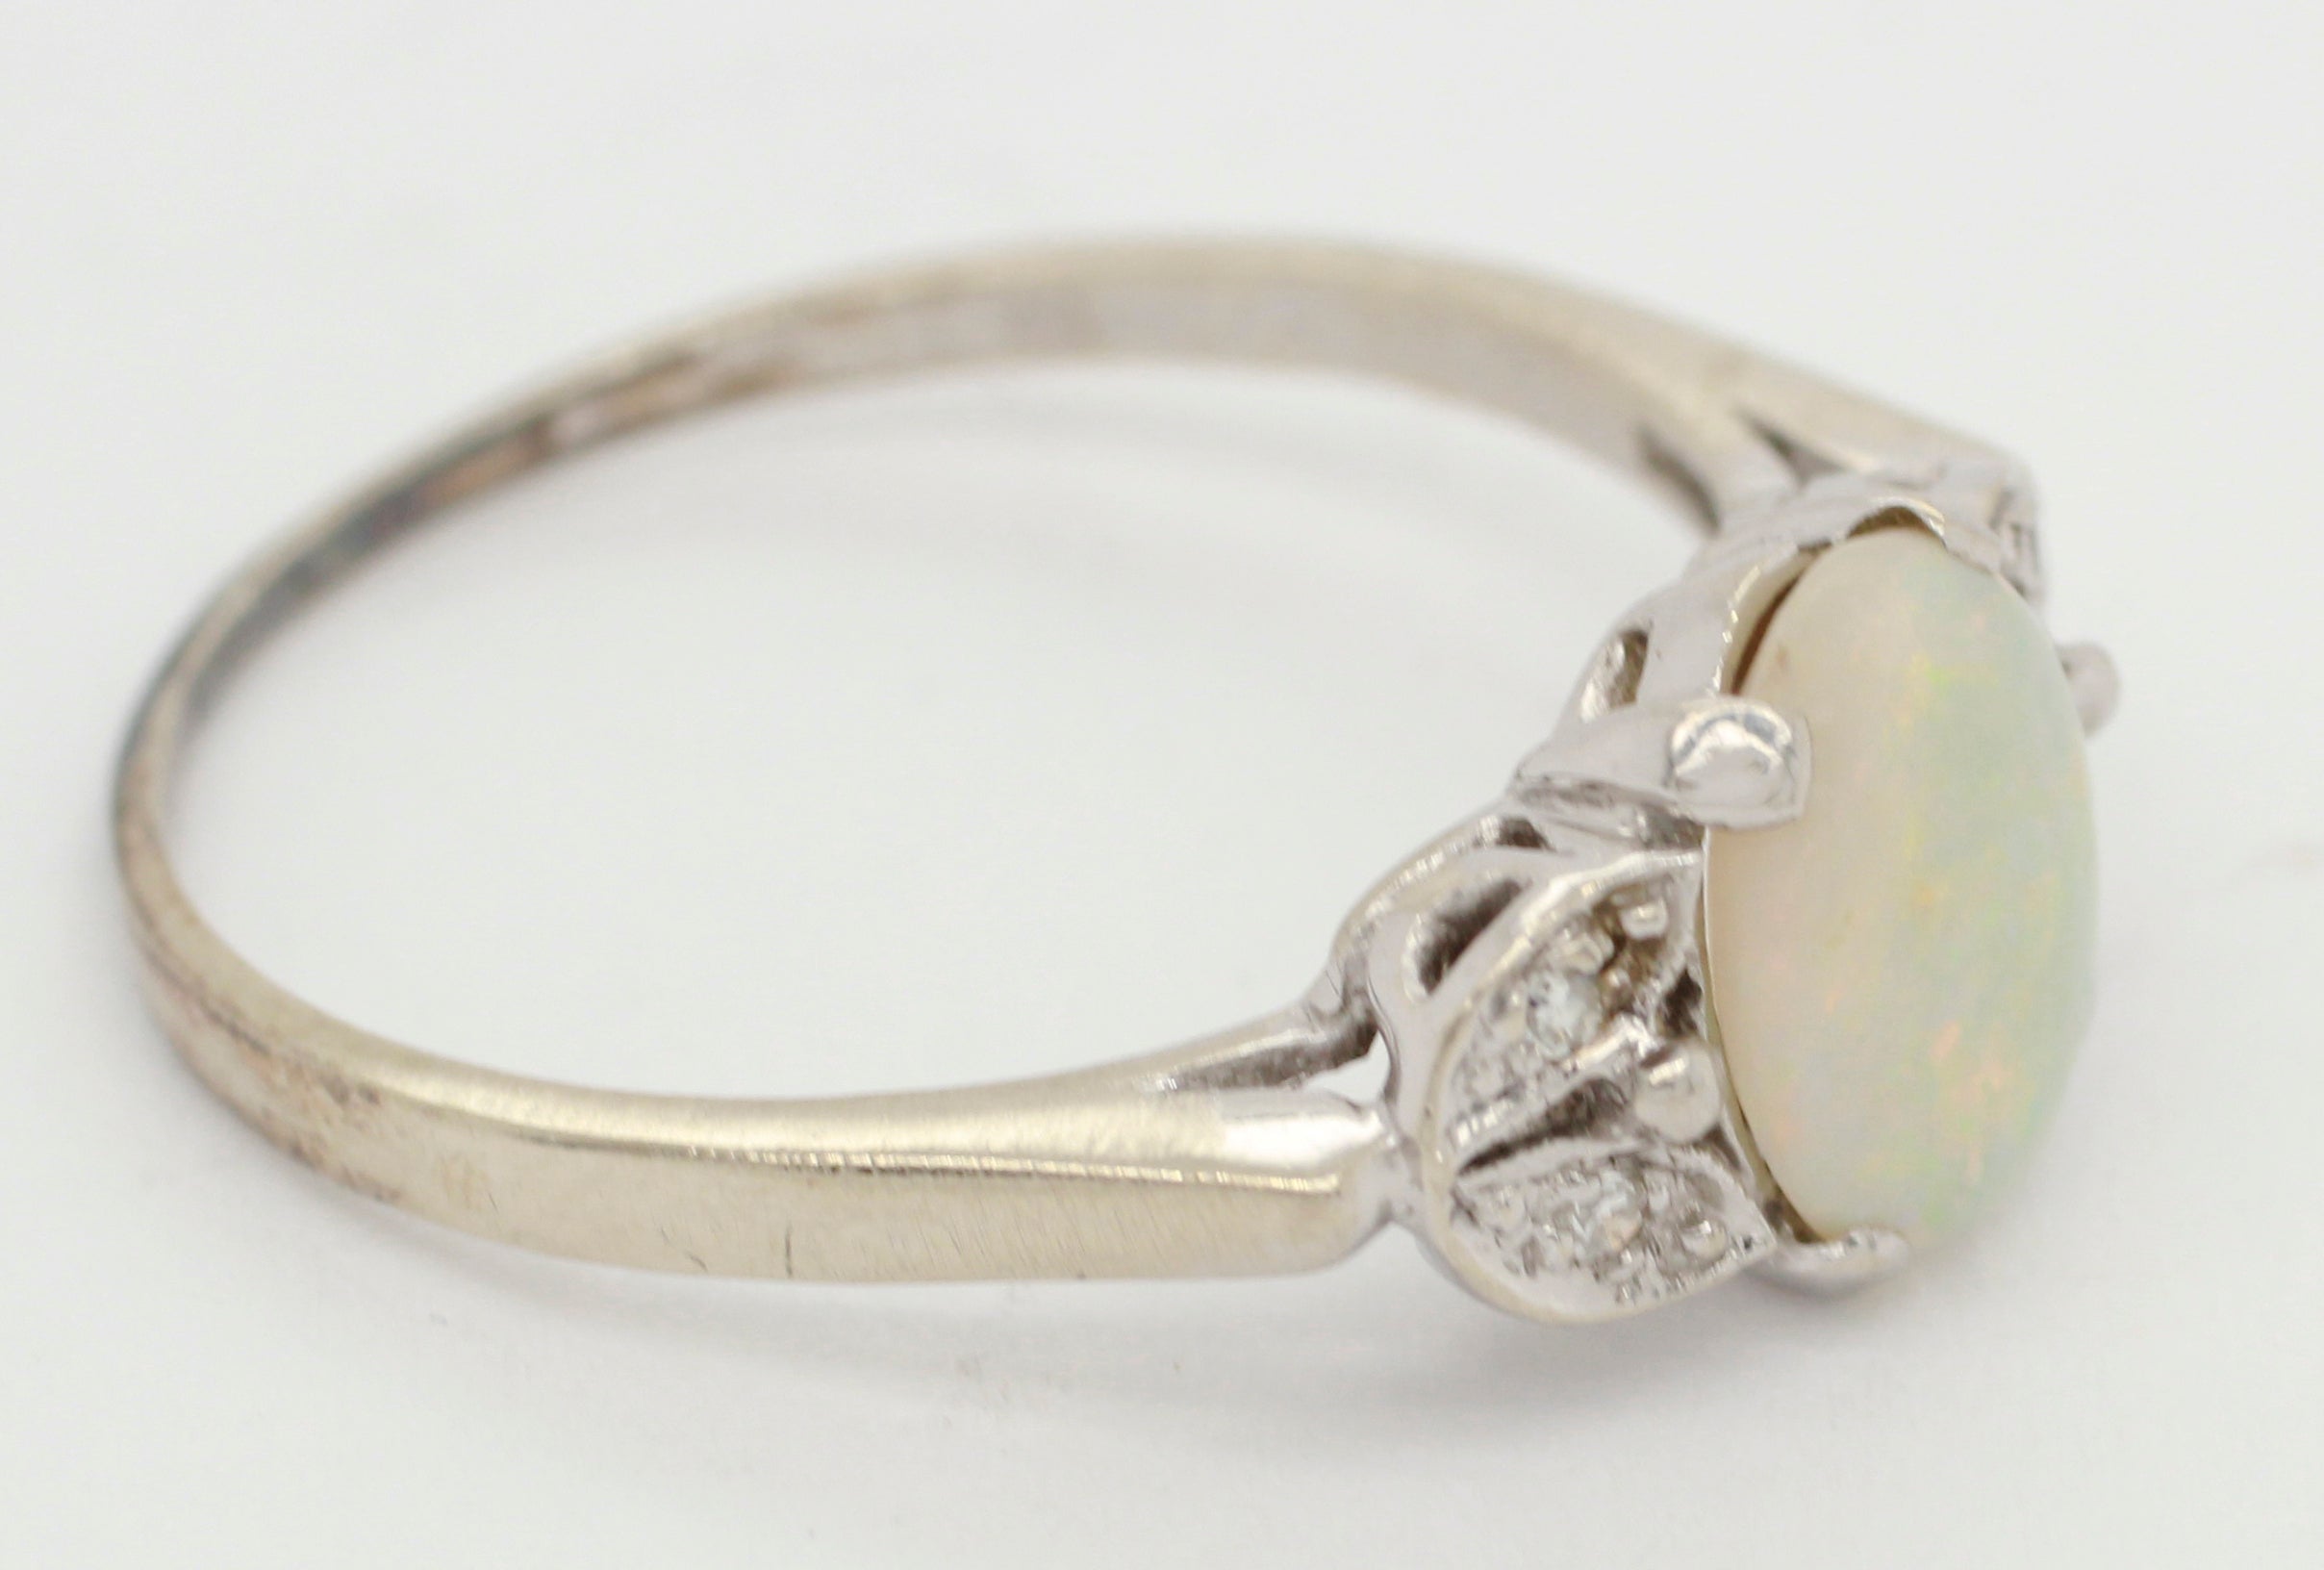 Vintage Art Deco White Gold & Opal Ring - Great Lakes Boutique